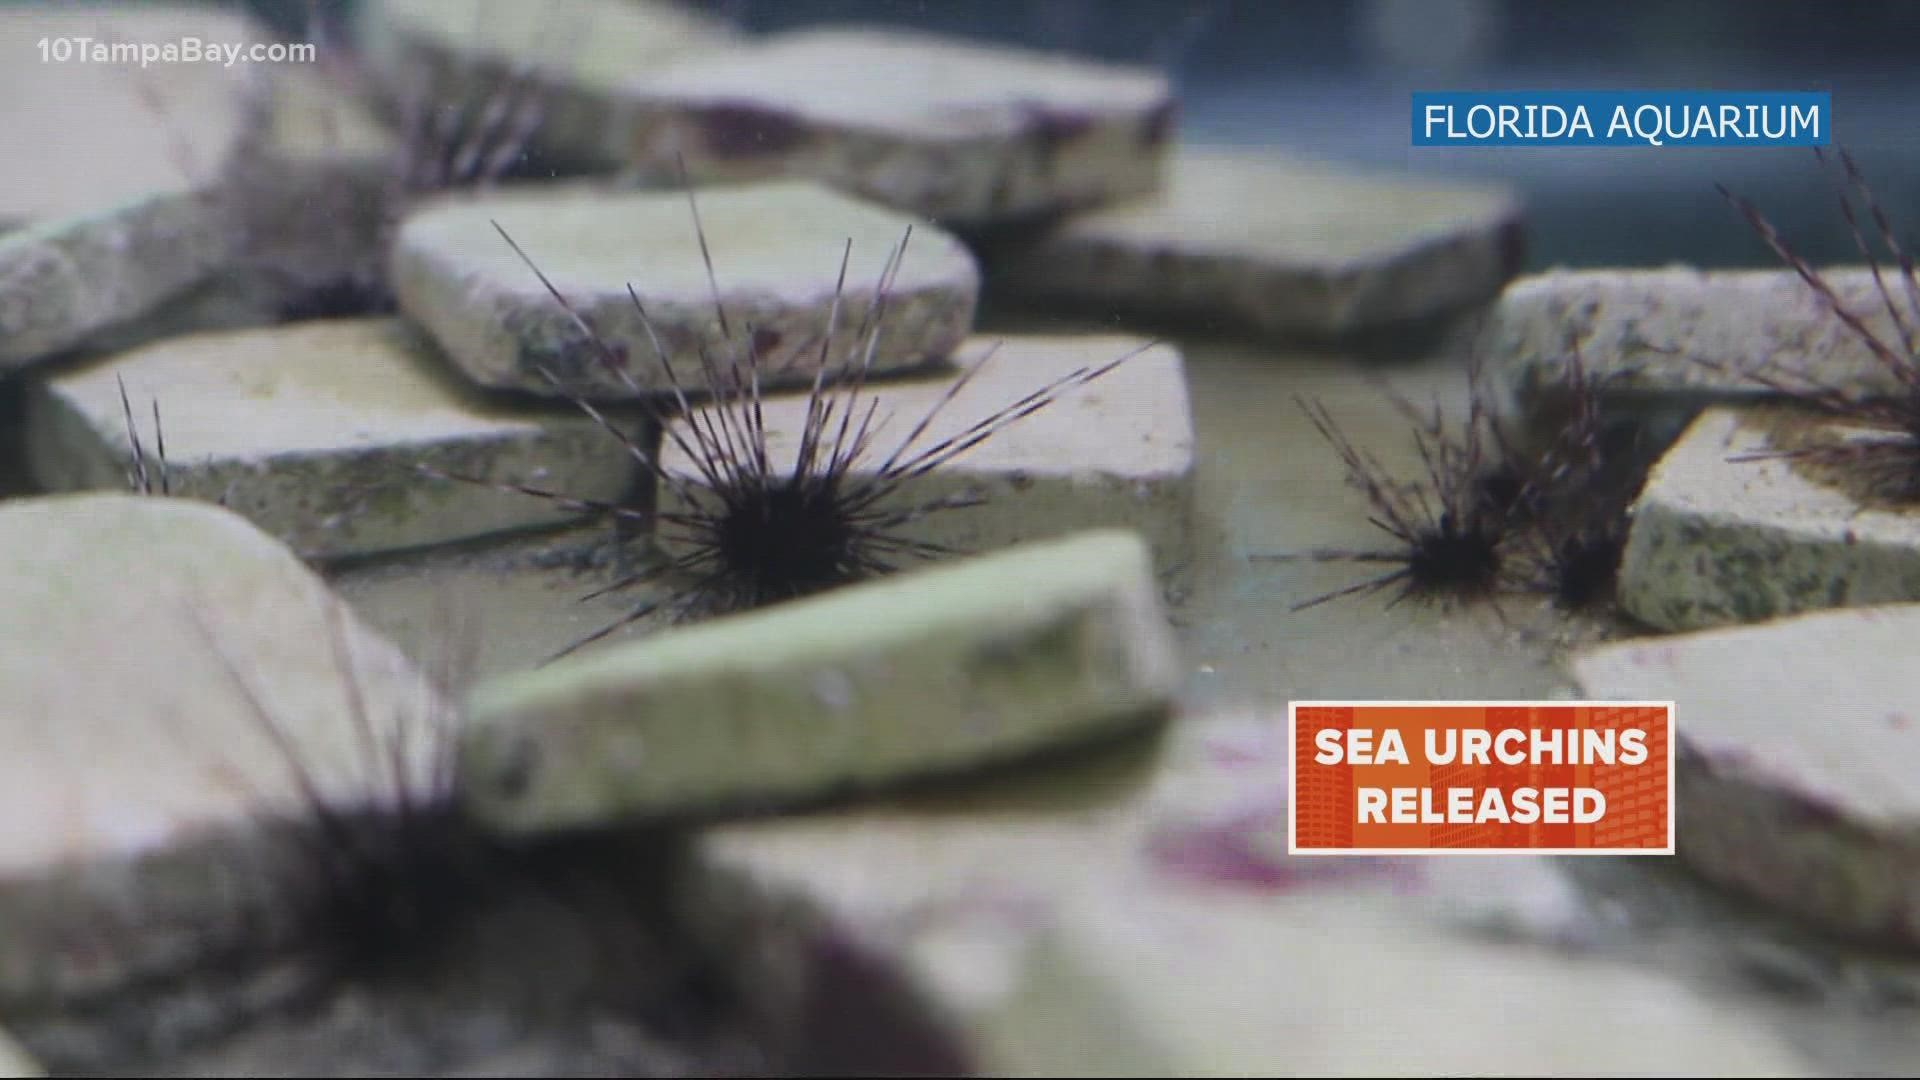 The aquarium says sea urchins play a vital role in keeping coral reefs alive.